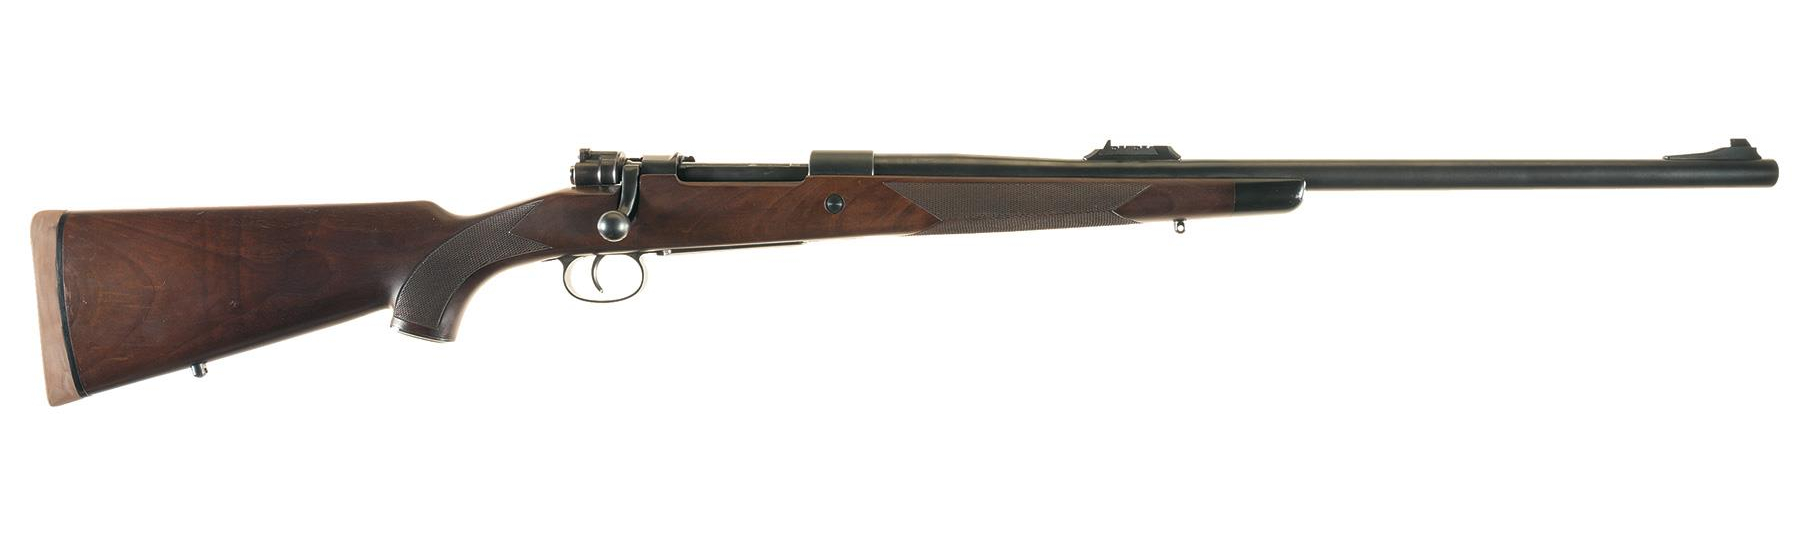 The Westley Richards .500 Jeffrey rifle is built on a Mauser 98 action with the standard flag safety. It is fitted with the usual multi leaf open V rear sight and has a standard magazine not an increased capacity drop magazine.